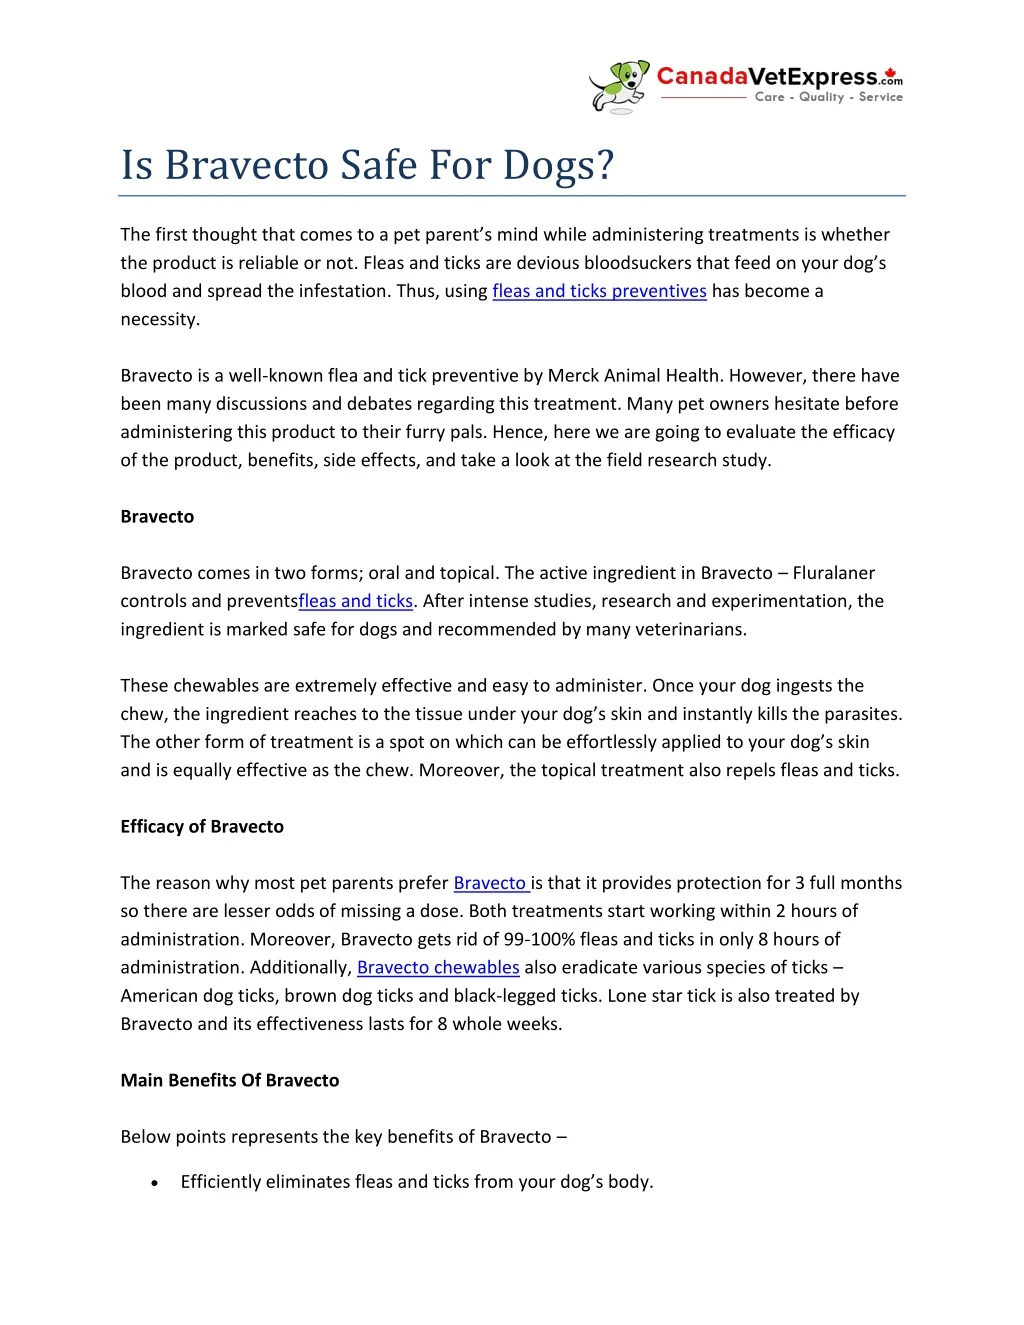 is bravecto safe for dogs